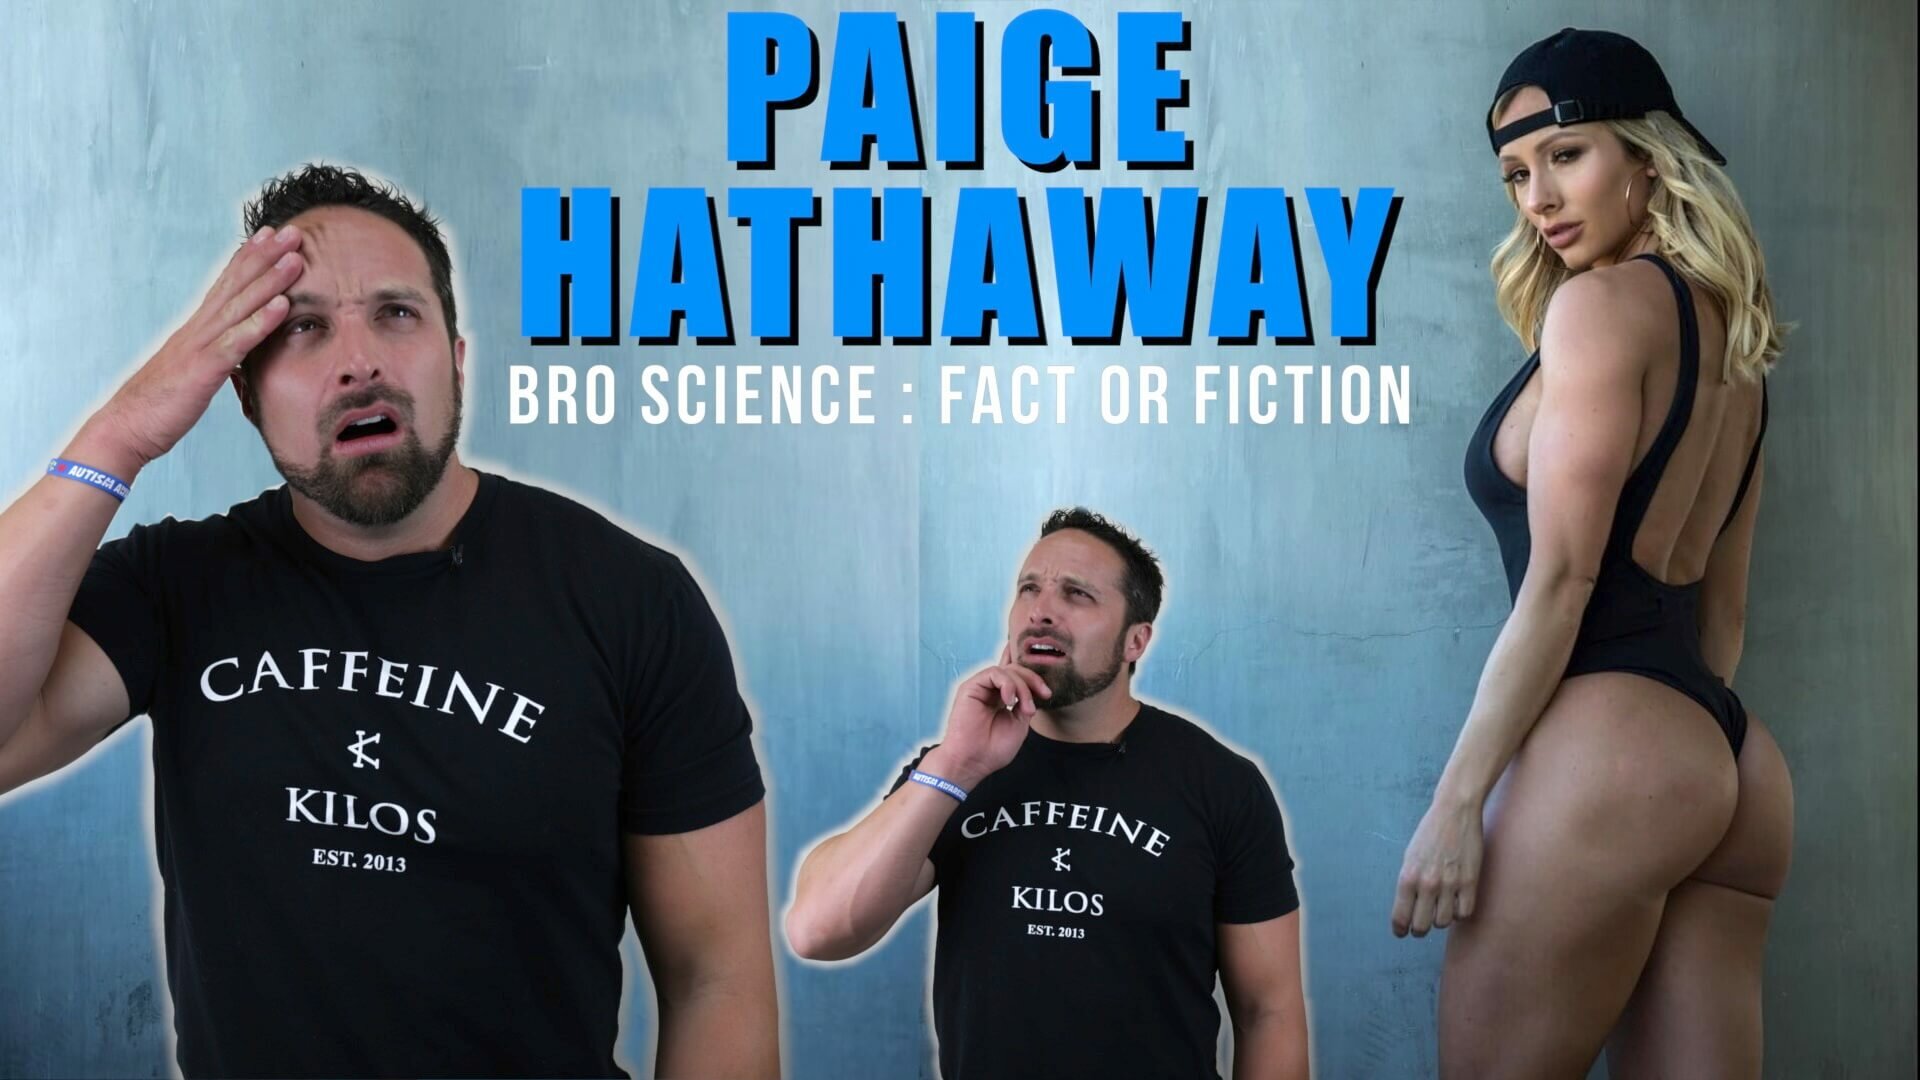 Paige Hathaway & Bro Science: Fact or Fiction